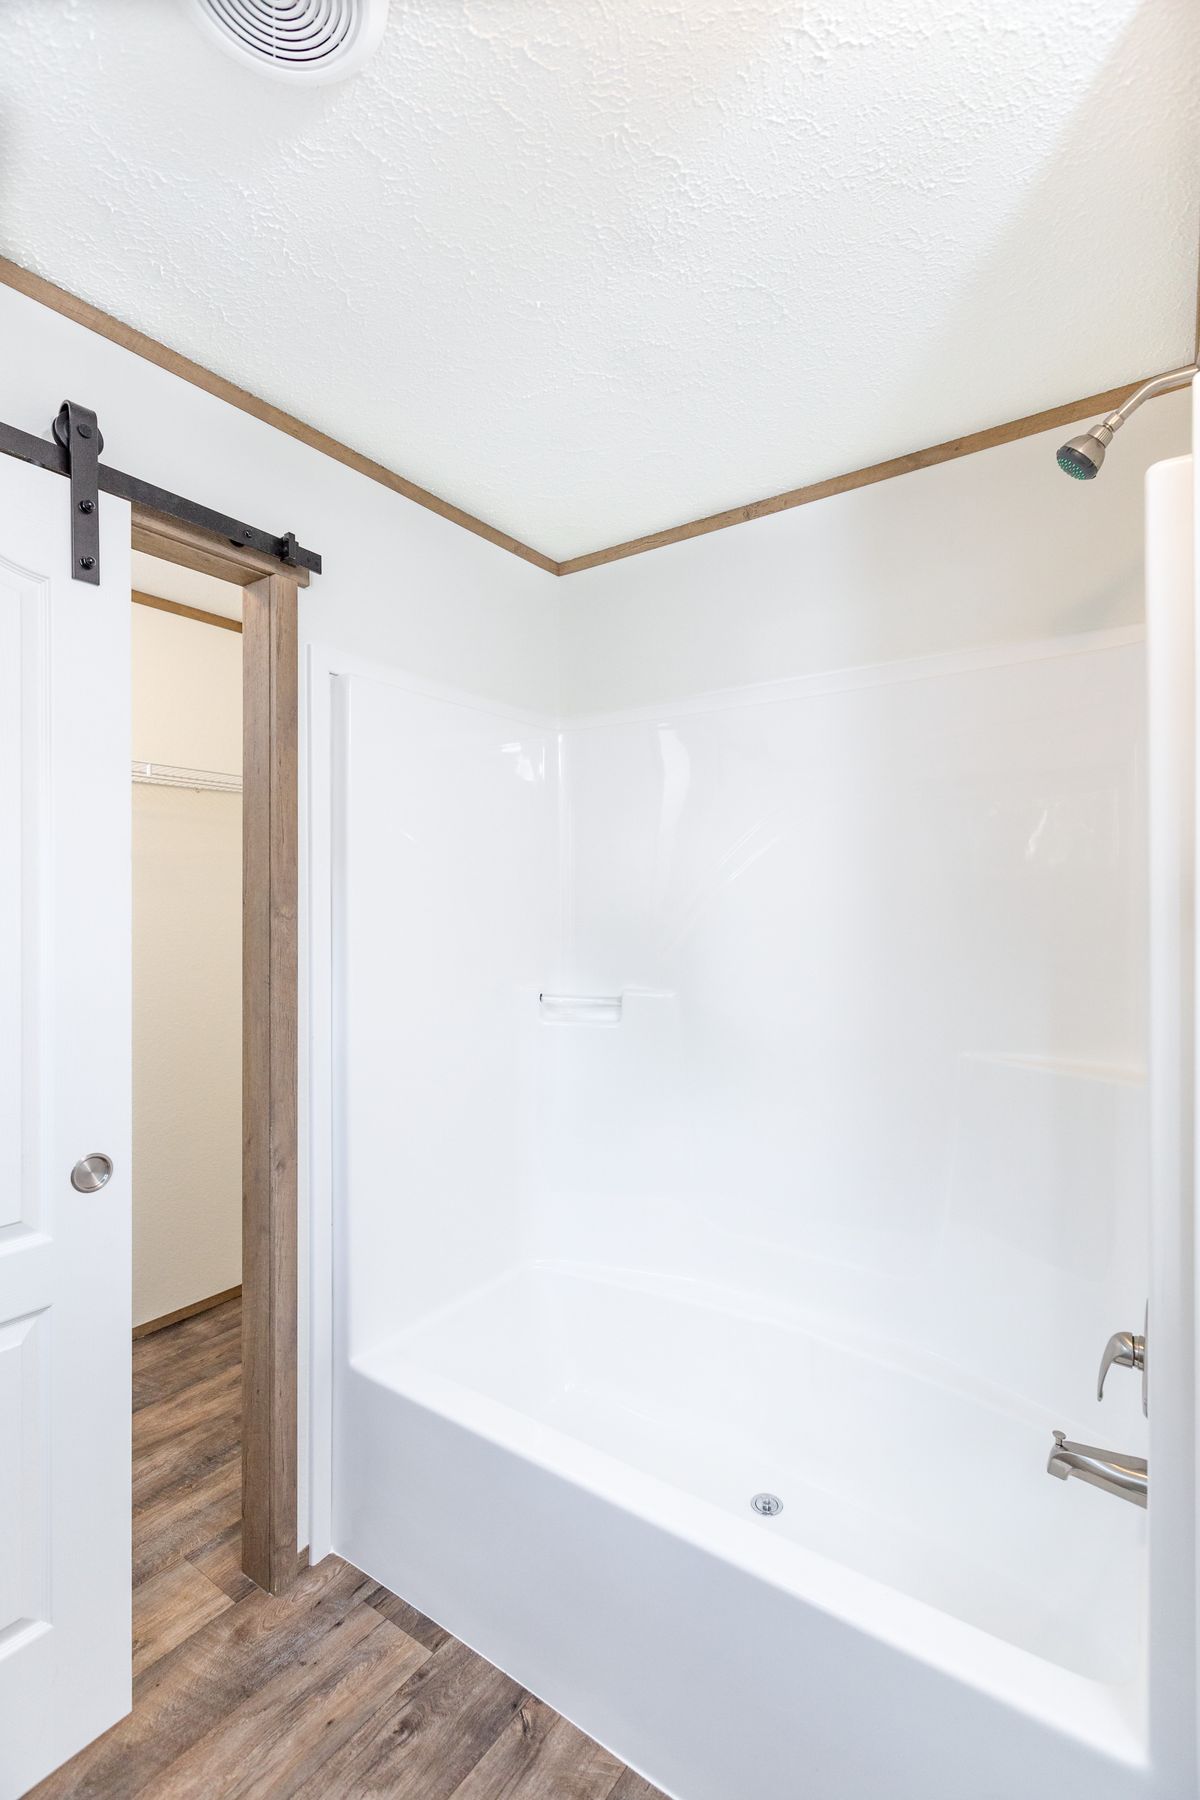 The LIFESTYLE 211 Master Bathroom. This Manufactured Mobile Home features 3 bedrooms and 2 baths.